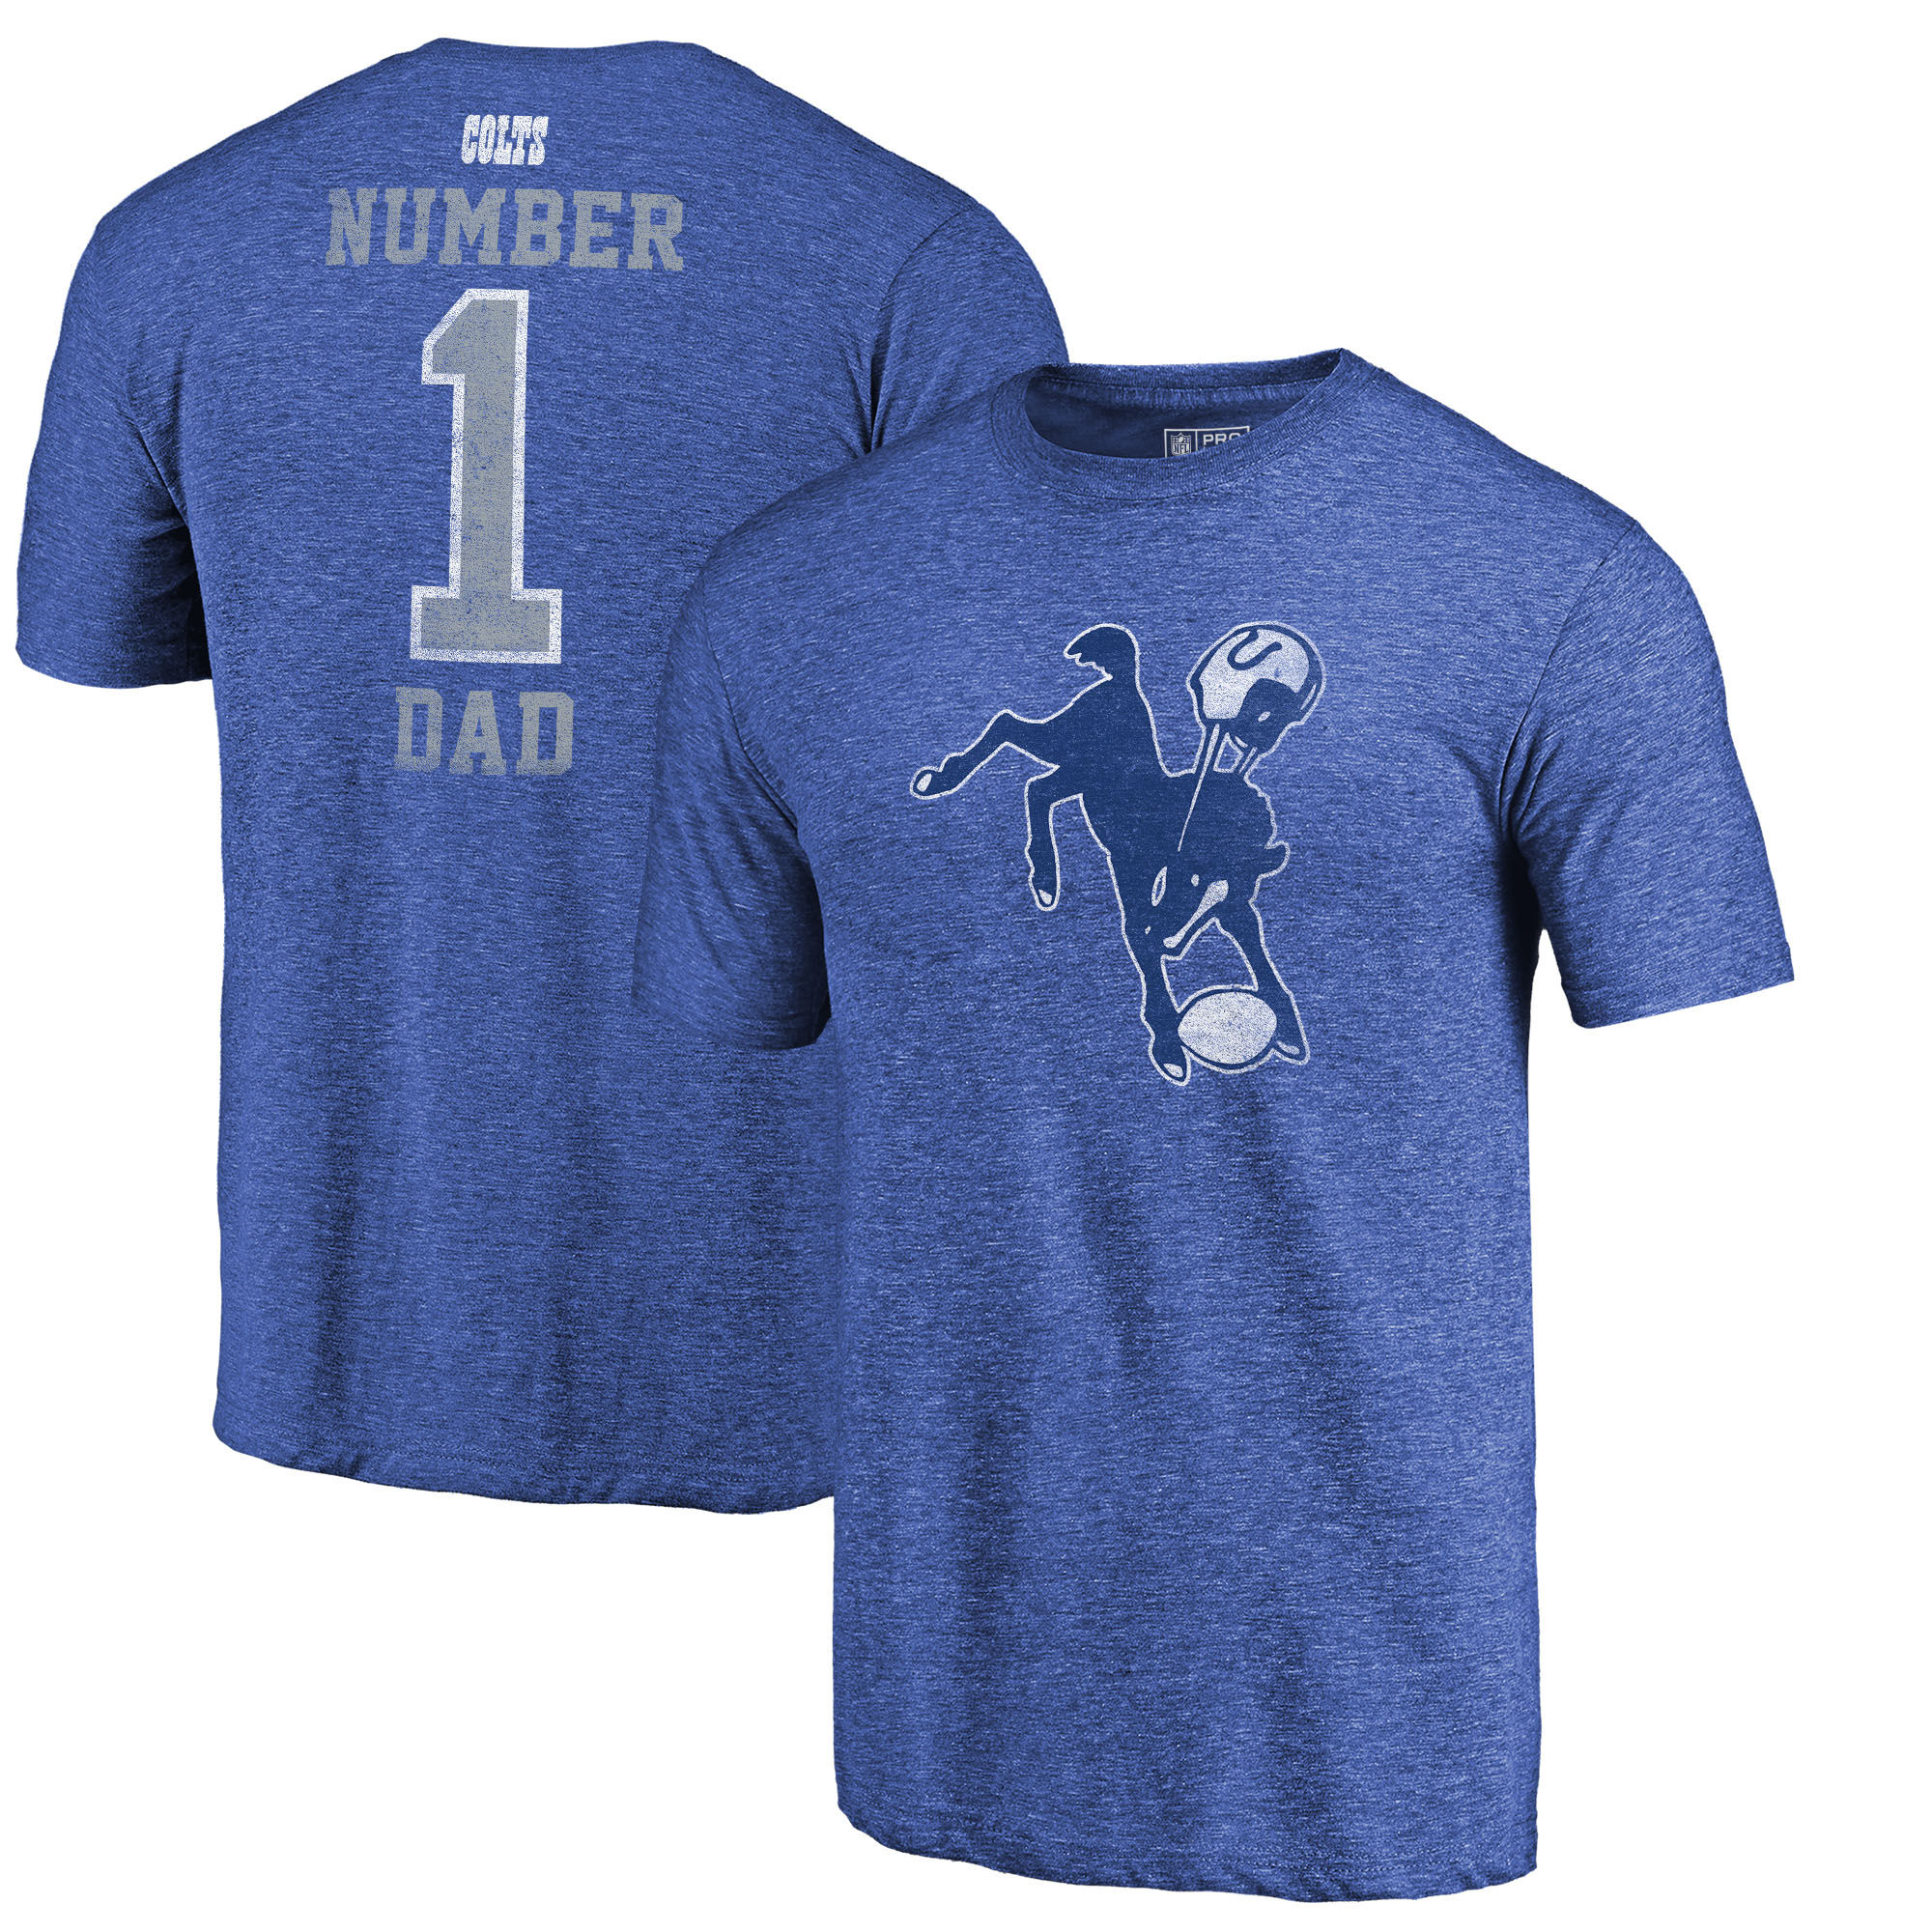 Indianapolis Colts NFL Pro Line by Fanatics Branded Royal Greatest Dad Retro Tri-Blend T-Shirt